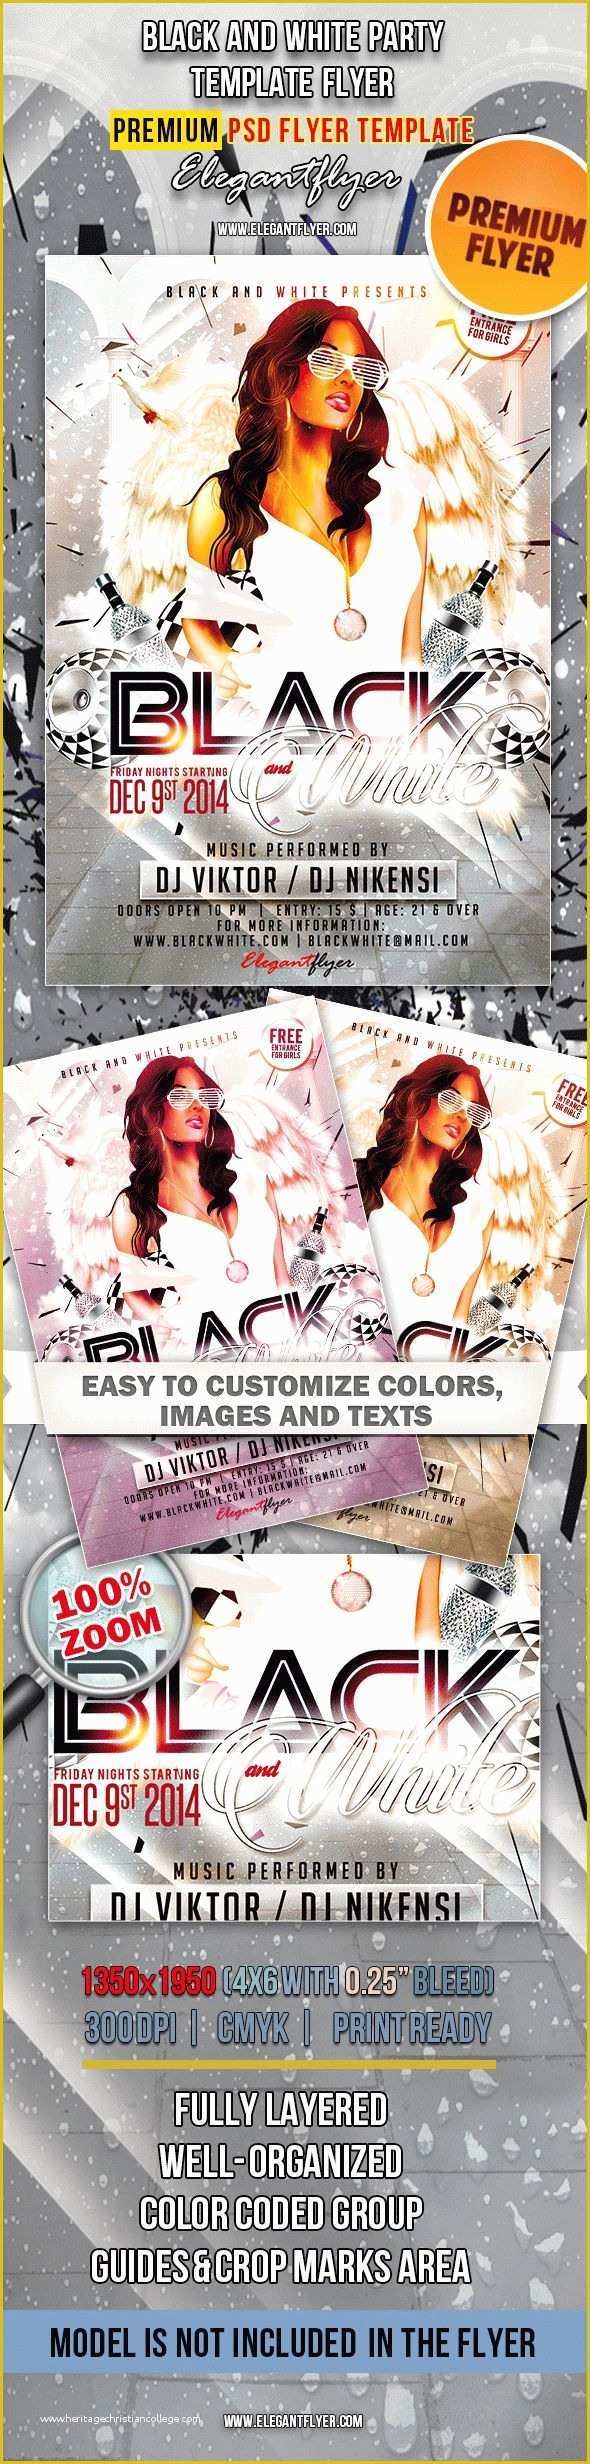 Black and White Flyer Template Free Of Black and White Party Flyer In Psd – by Elegantflyer